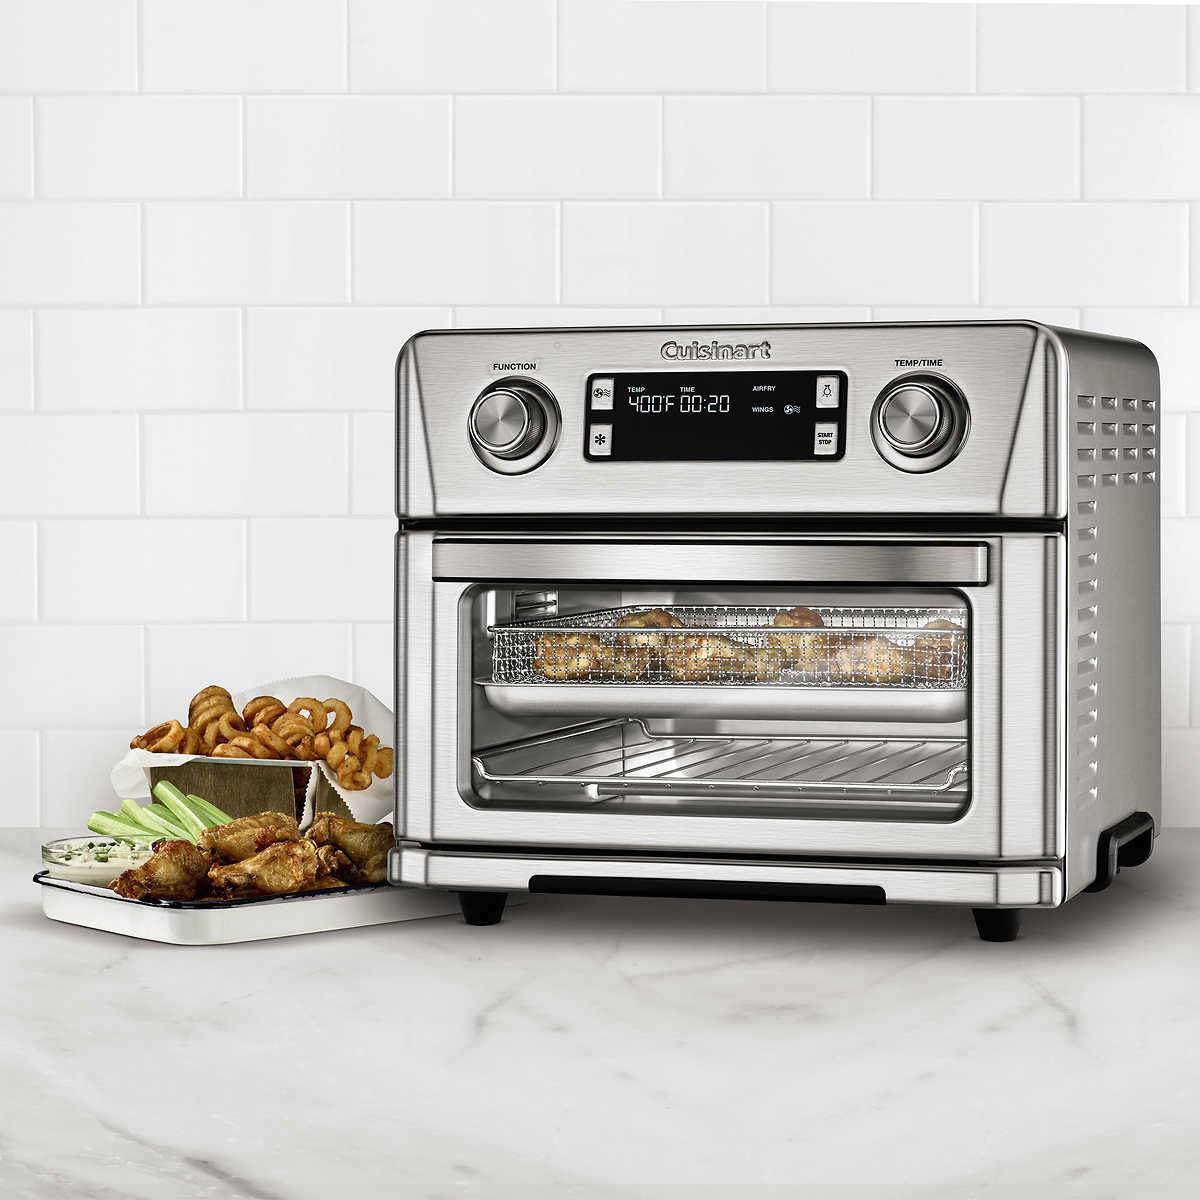 https://theseason.com/image/cache/products/2022/02/cuisinart-digital-display-airfry-toaster-oven-1800-watts-ctoa130pc2-silver-232388752-1200x1200.jpg